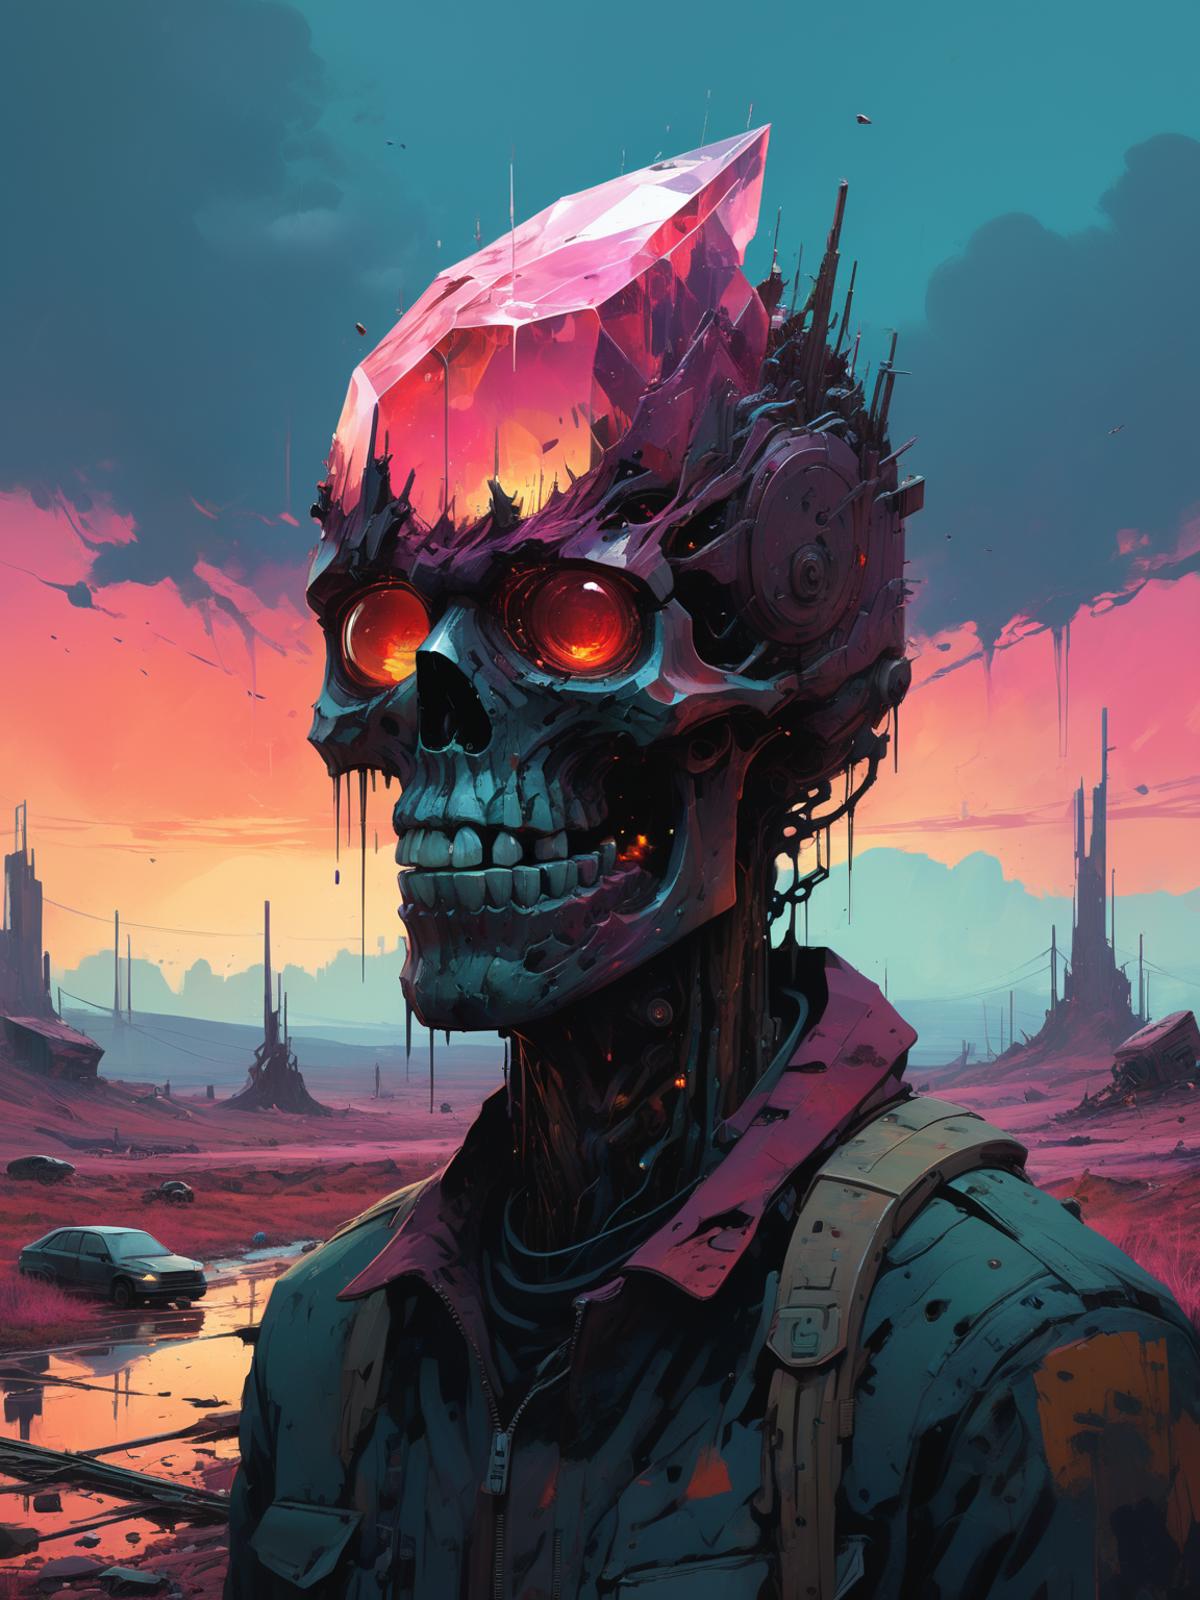 A robotic character with a gem in its head stands in a wasteland.